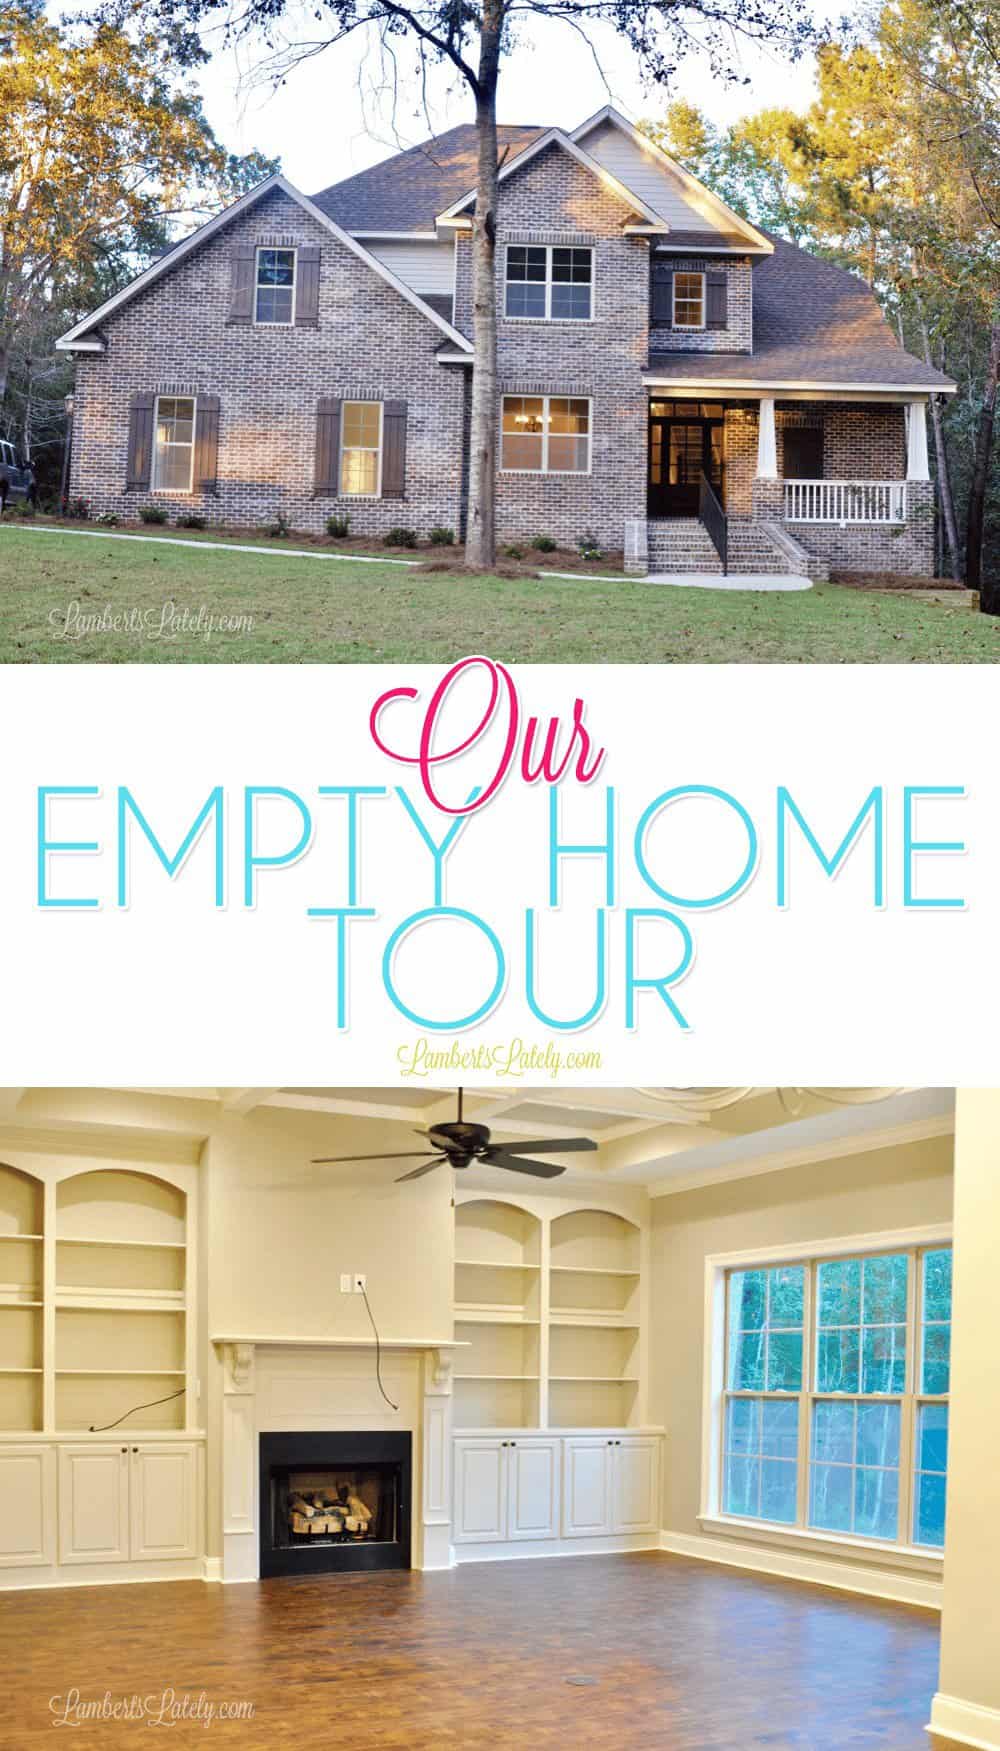 Our Empty Home Tour - great collection of photos from an empty house! Includes kitchen organization and built-in cabinets.